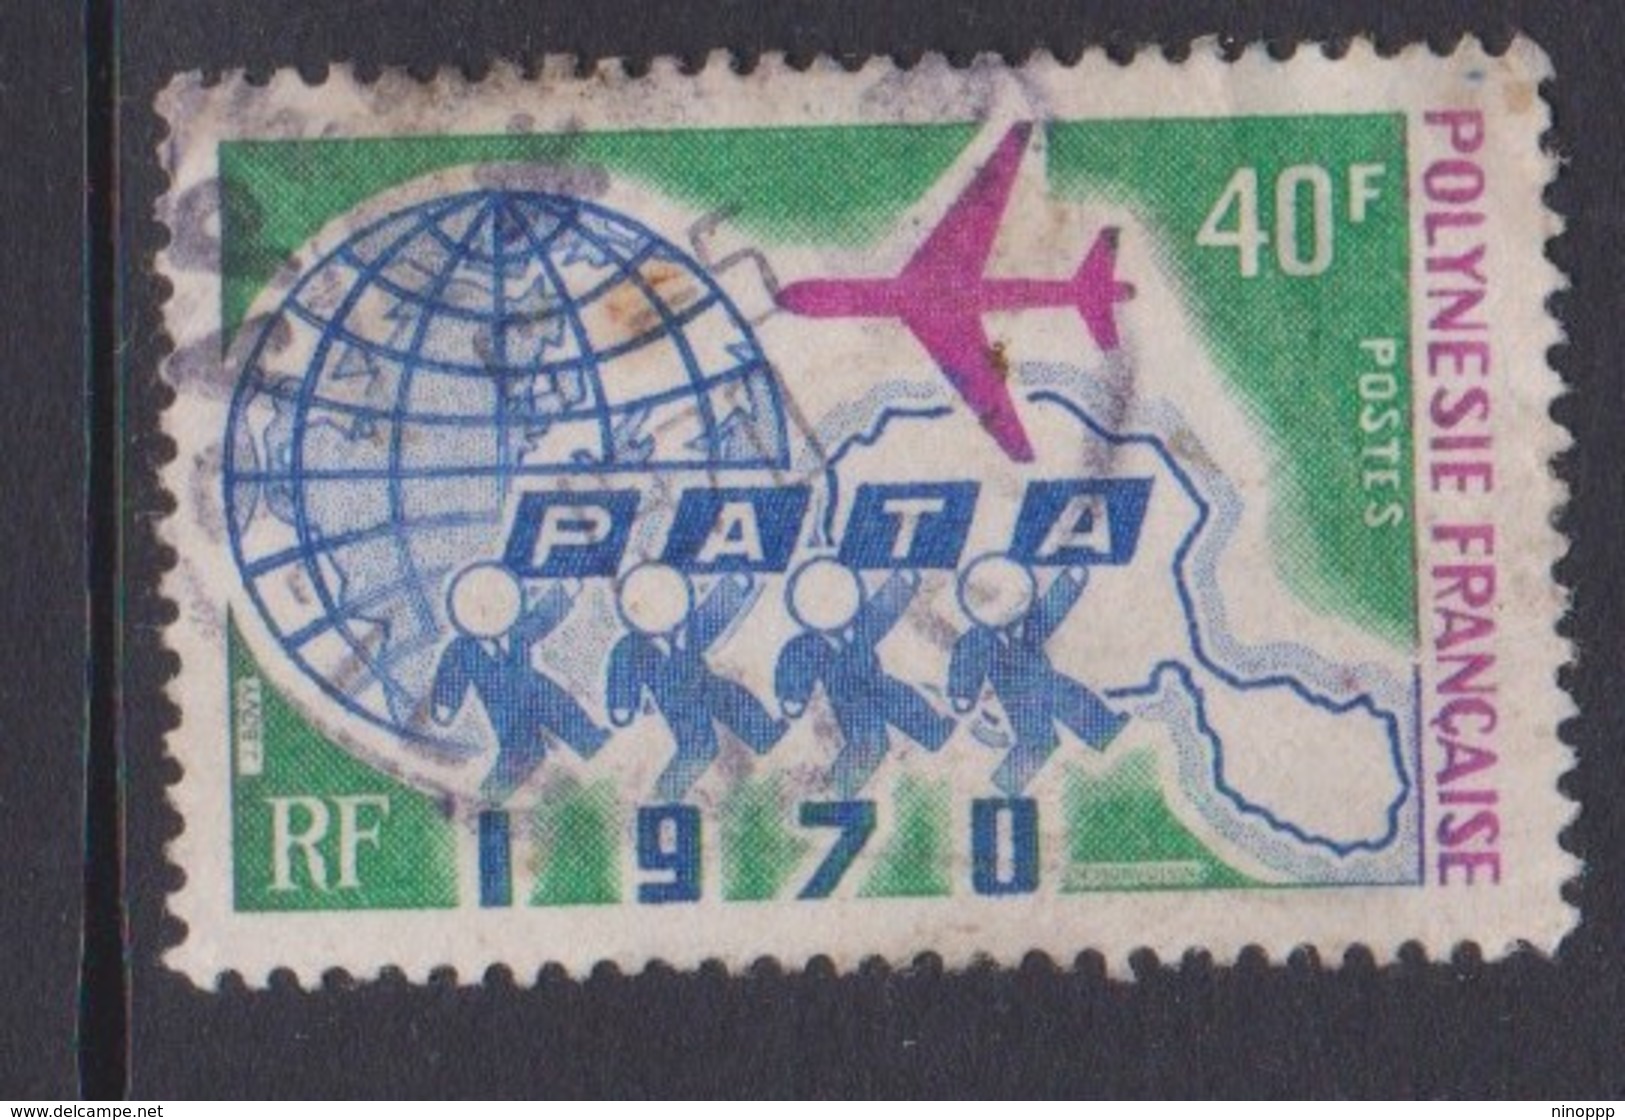 French Polynesia SC 259 1970 Pata Congress, 40f Globe, Plane,map, Used, Toned - Airplanes